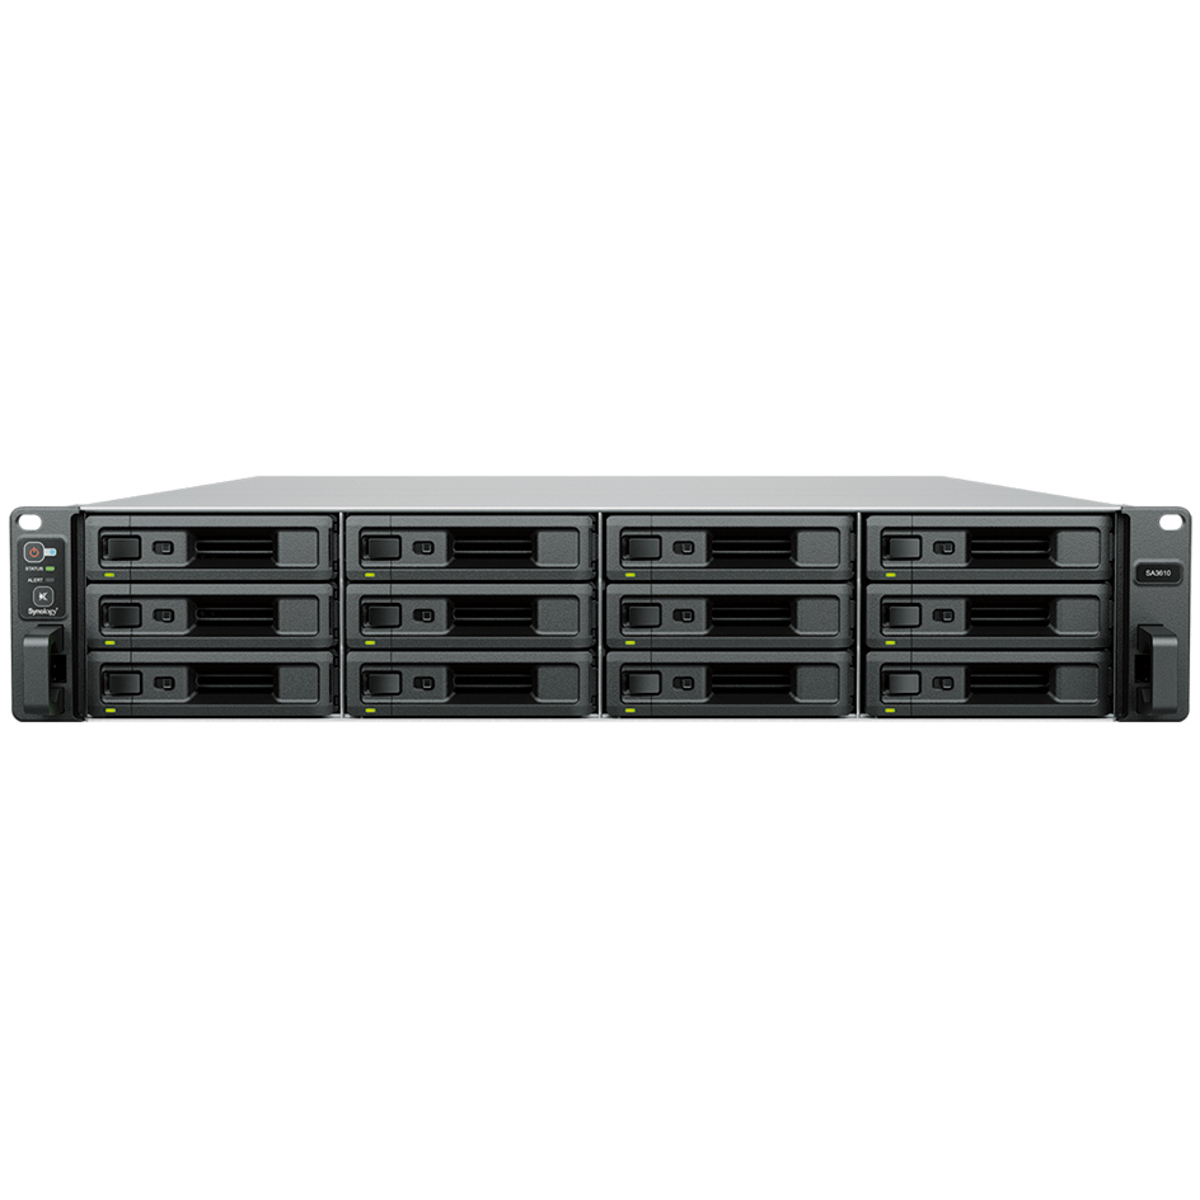 Synology RackStation SA3610 120tb 12-Bay RackMount Large Business / Enterprise NAS - Network Attached Storage Device 12x10tb Seagate IronWolf ST10000VN000 3.5 7200rpm SATA 6Gb/s HDD NAS Class Drives Installed - Burn-In Tested RackStation SA3610